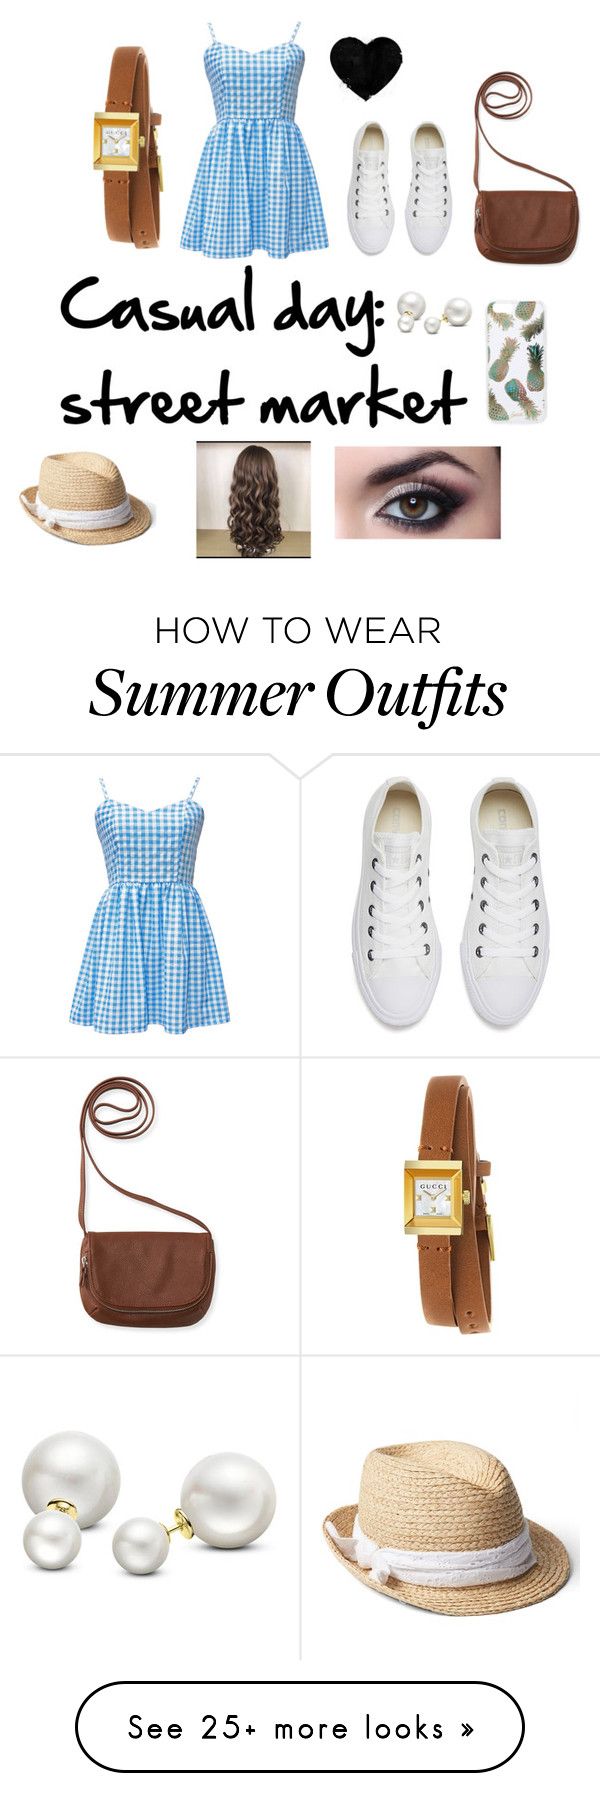 "Casual outfits" by rjdee on Polyvore featuring Converse, AÃ©roposta...